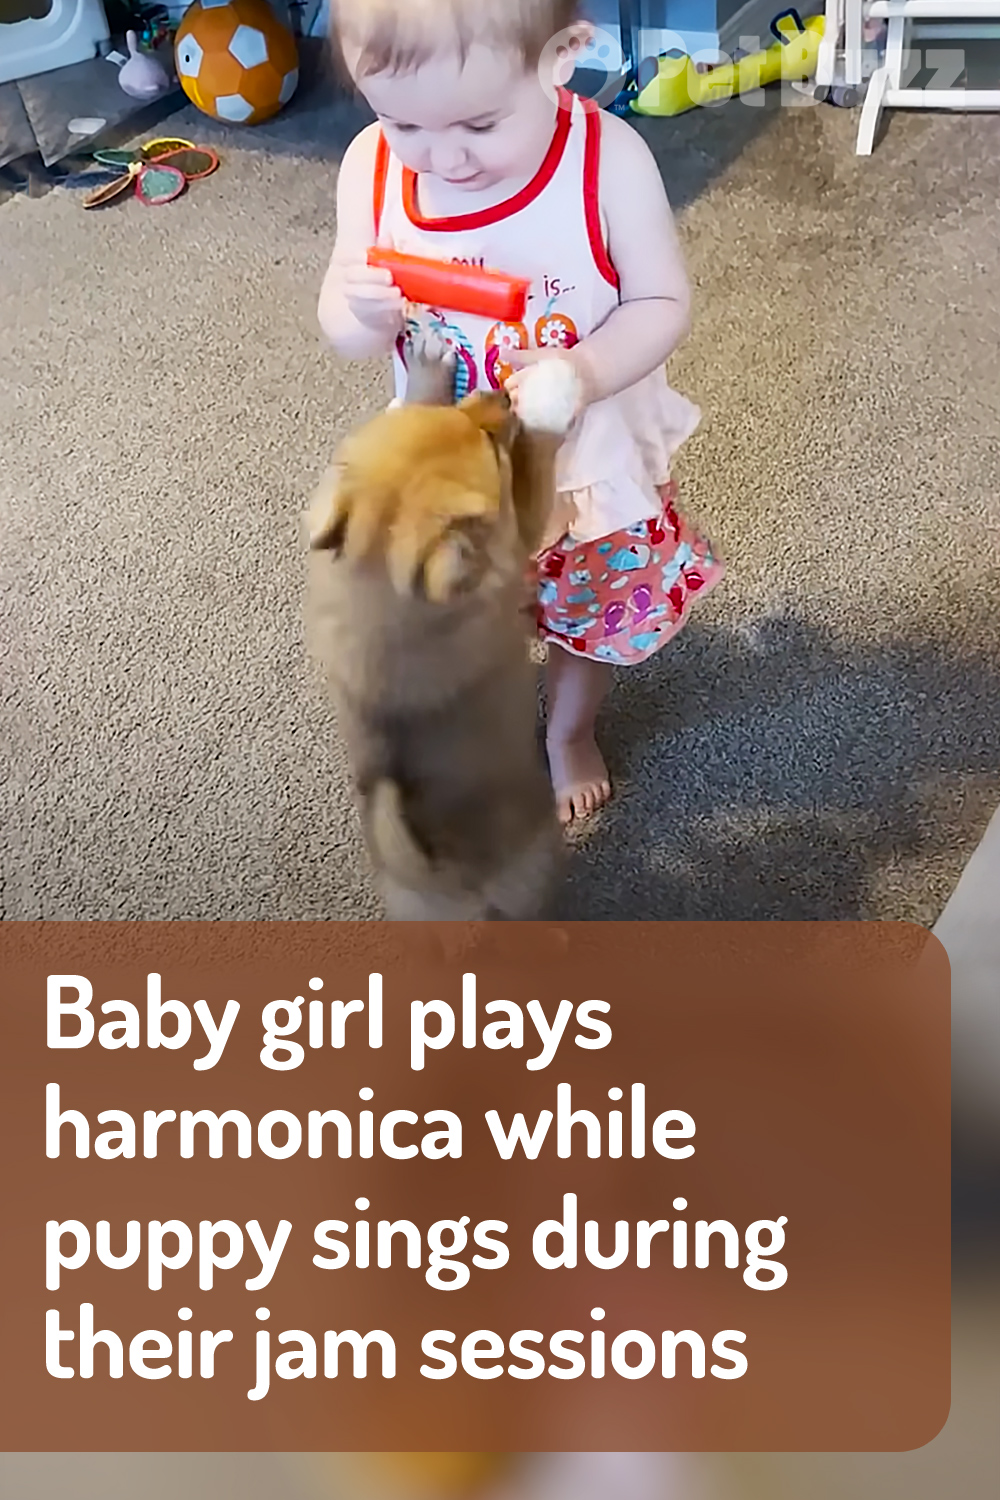 Baby girl plays harmonica while puppy sings during their jam sessions